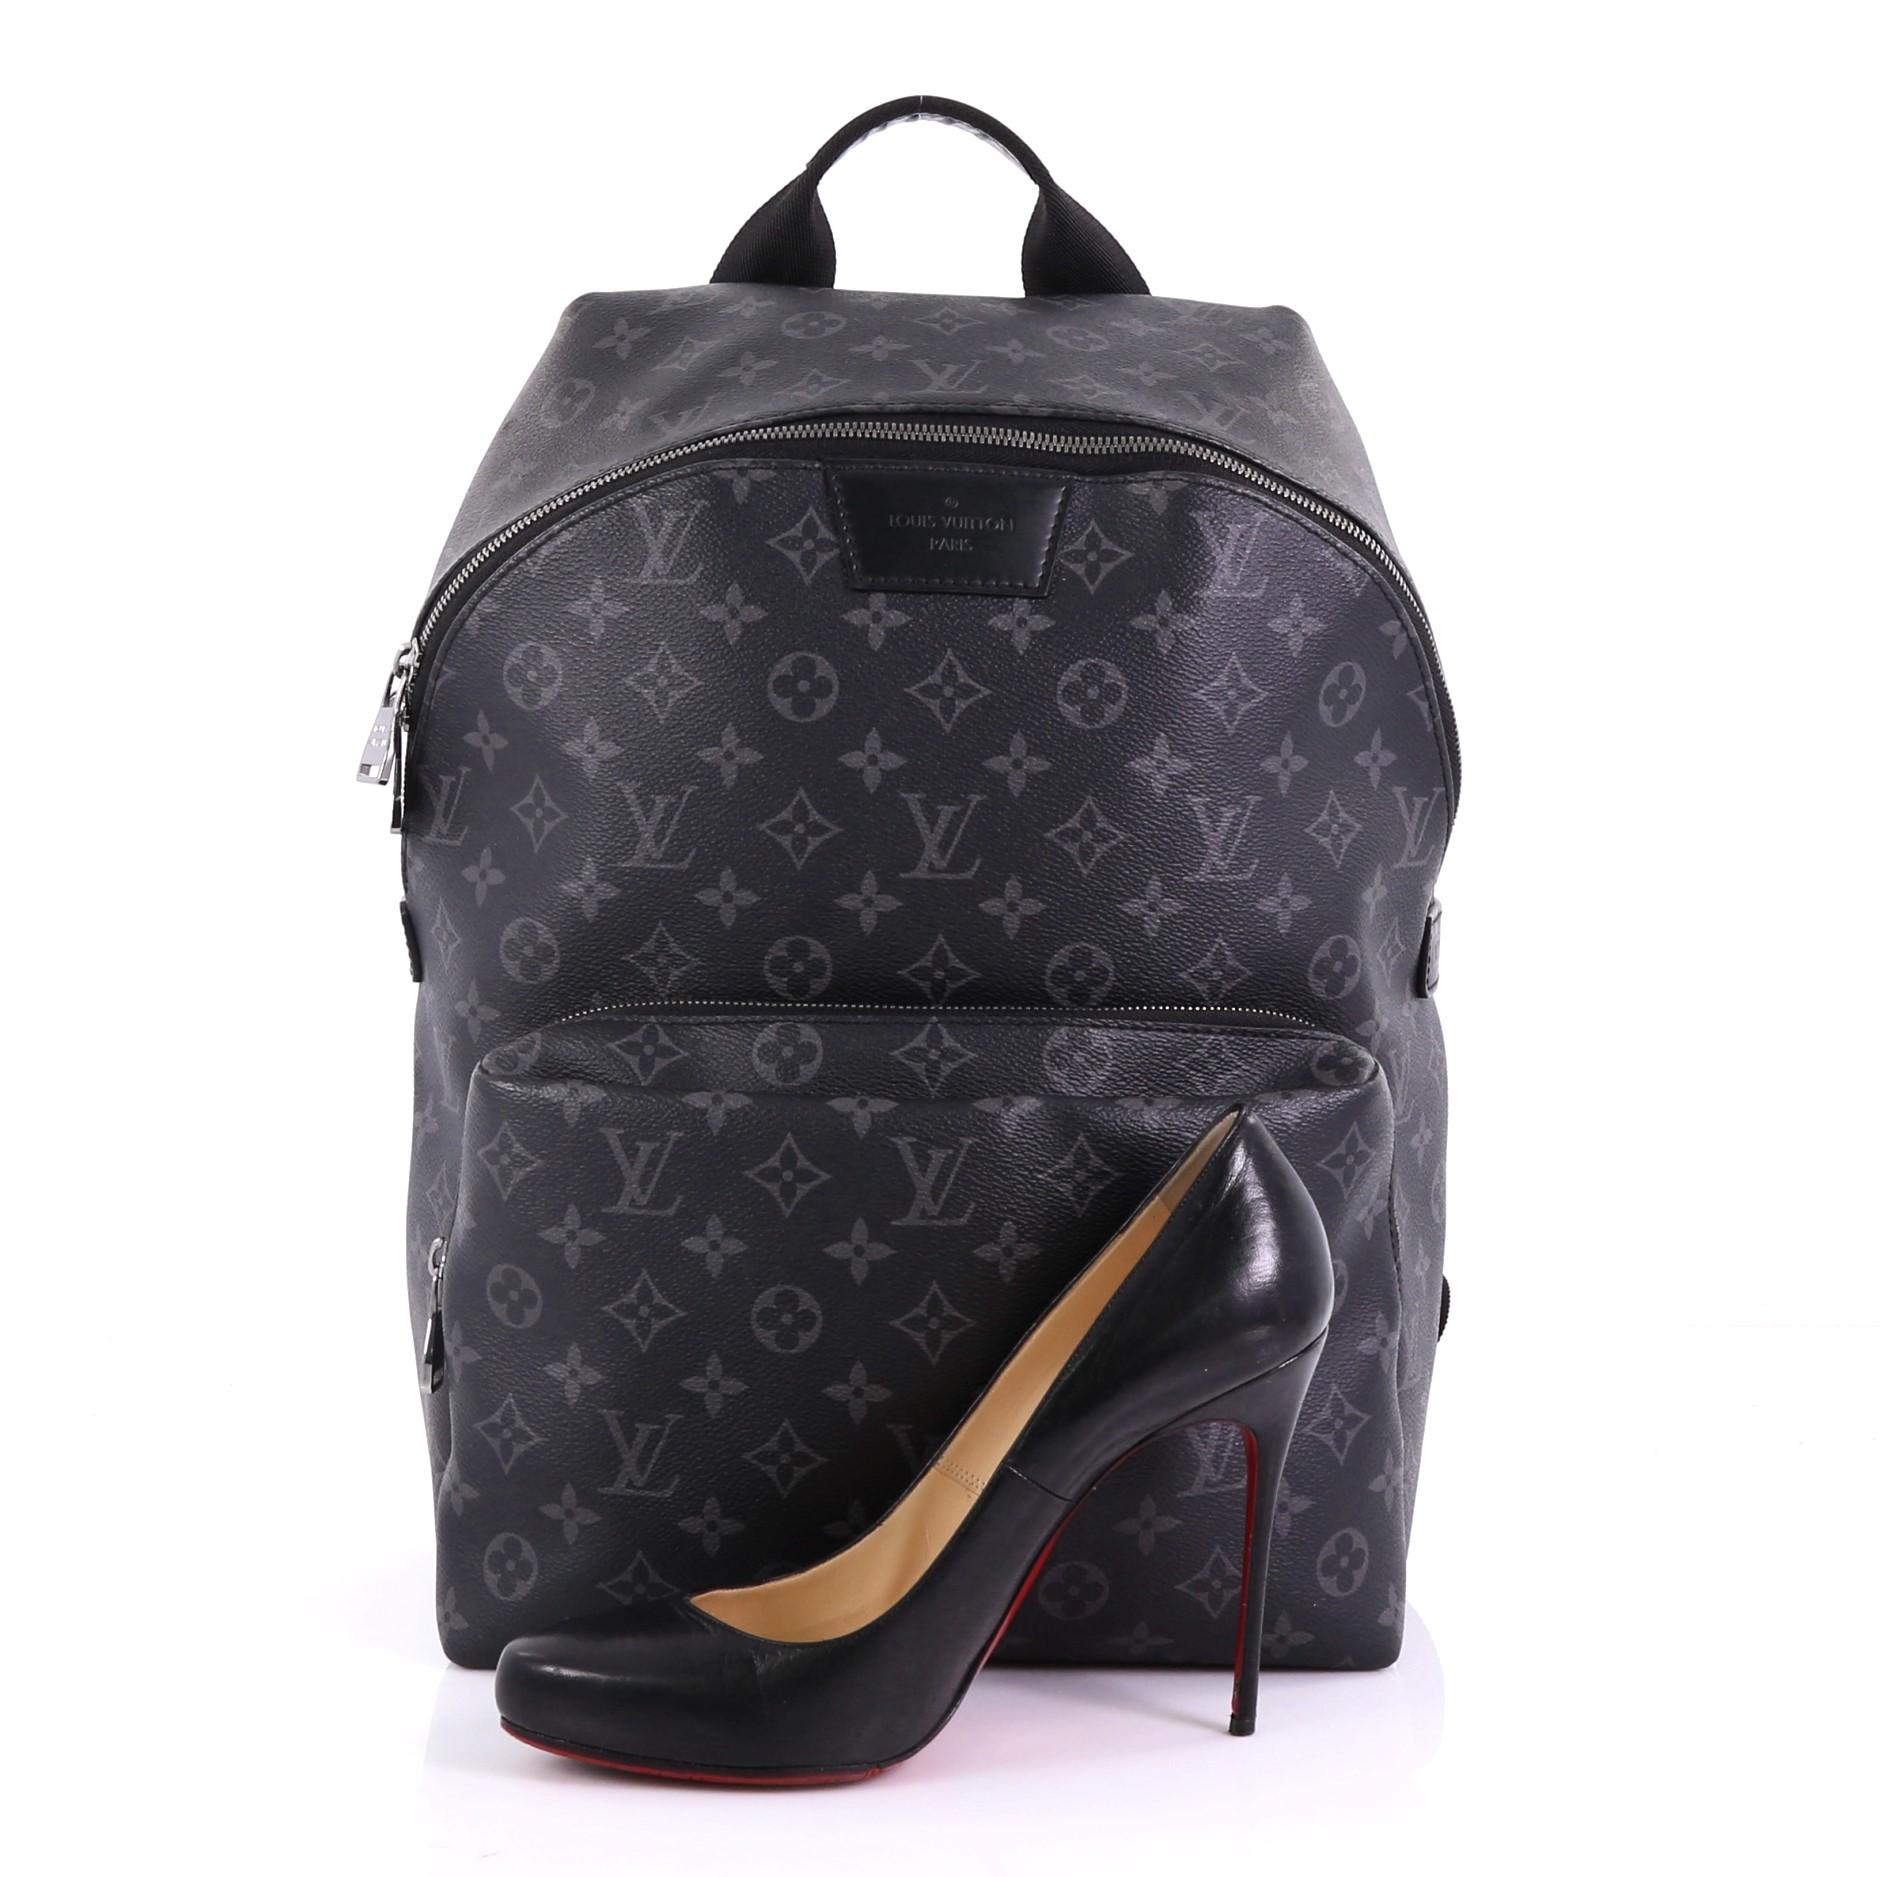 This Louis Vuitton Apollo Backpack Monogram Eclipse Canvas, crafted from black monogram eclipse coated canvas, features a top handle, adjustable back straps, exterior front zip compartment, and silver-tone hardware. Its two-way zip closure opens to